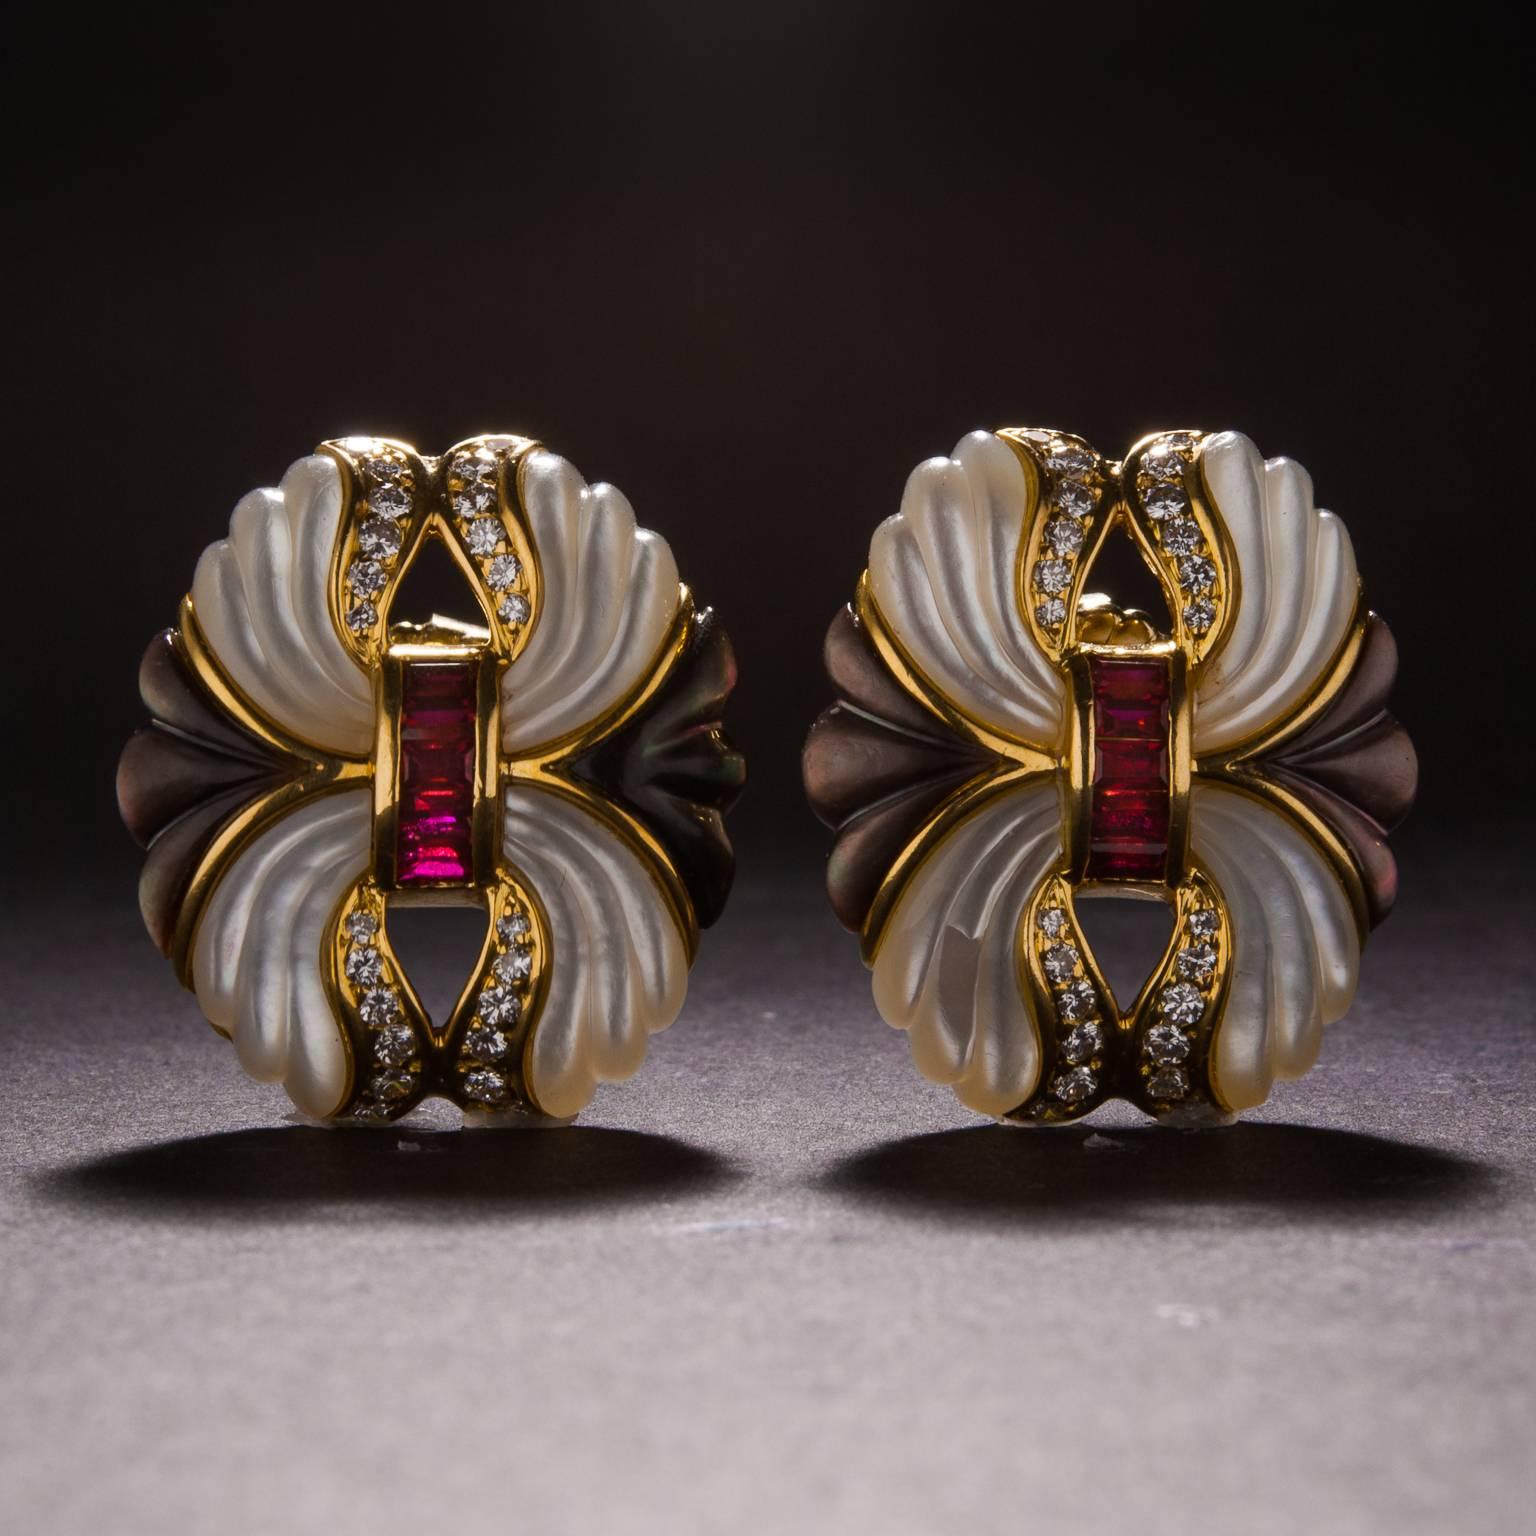 A lovely pair of earrings with carved white and black mother of pearl, 1.00 total carats of rubies, and .50 total carats of diamonds. These earrings feature a post style back and are made in 18k yellow gold. 